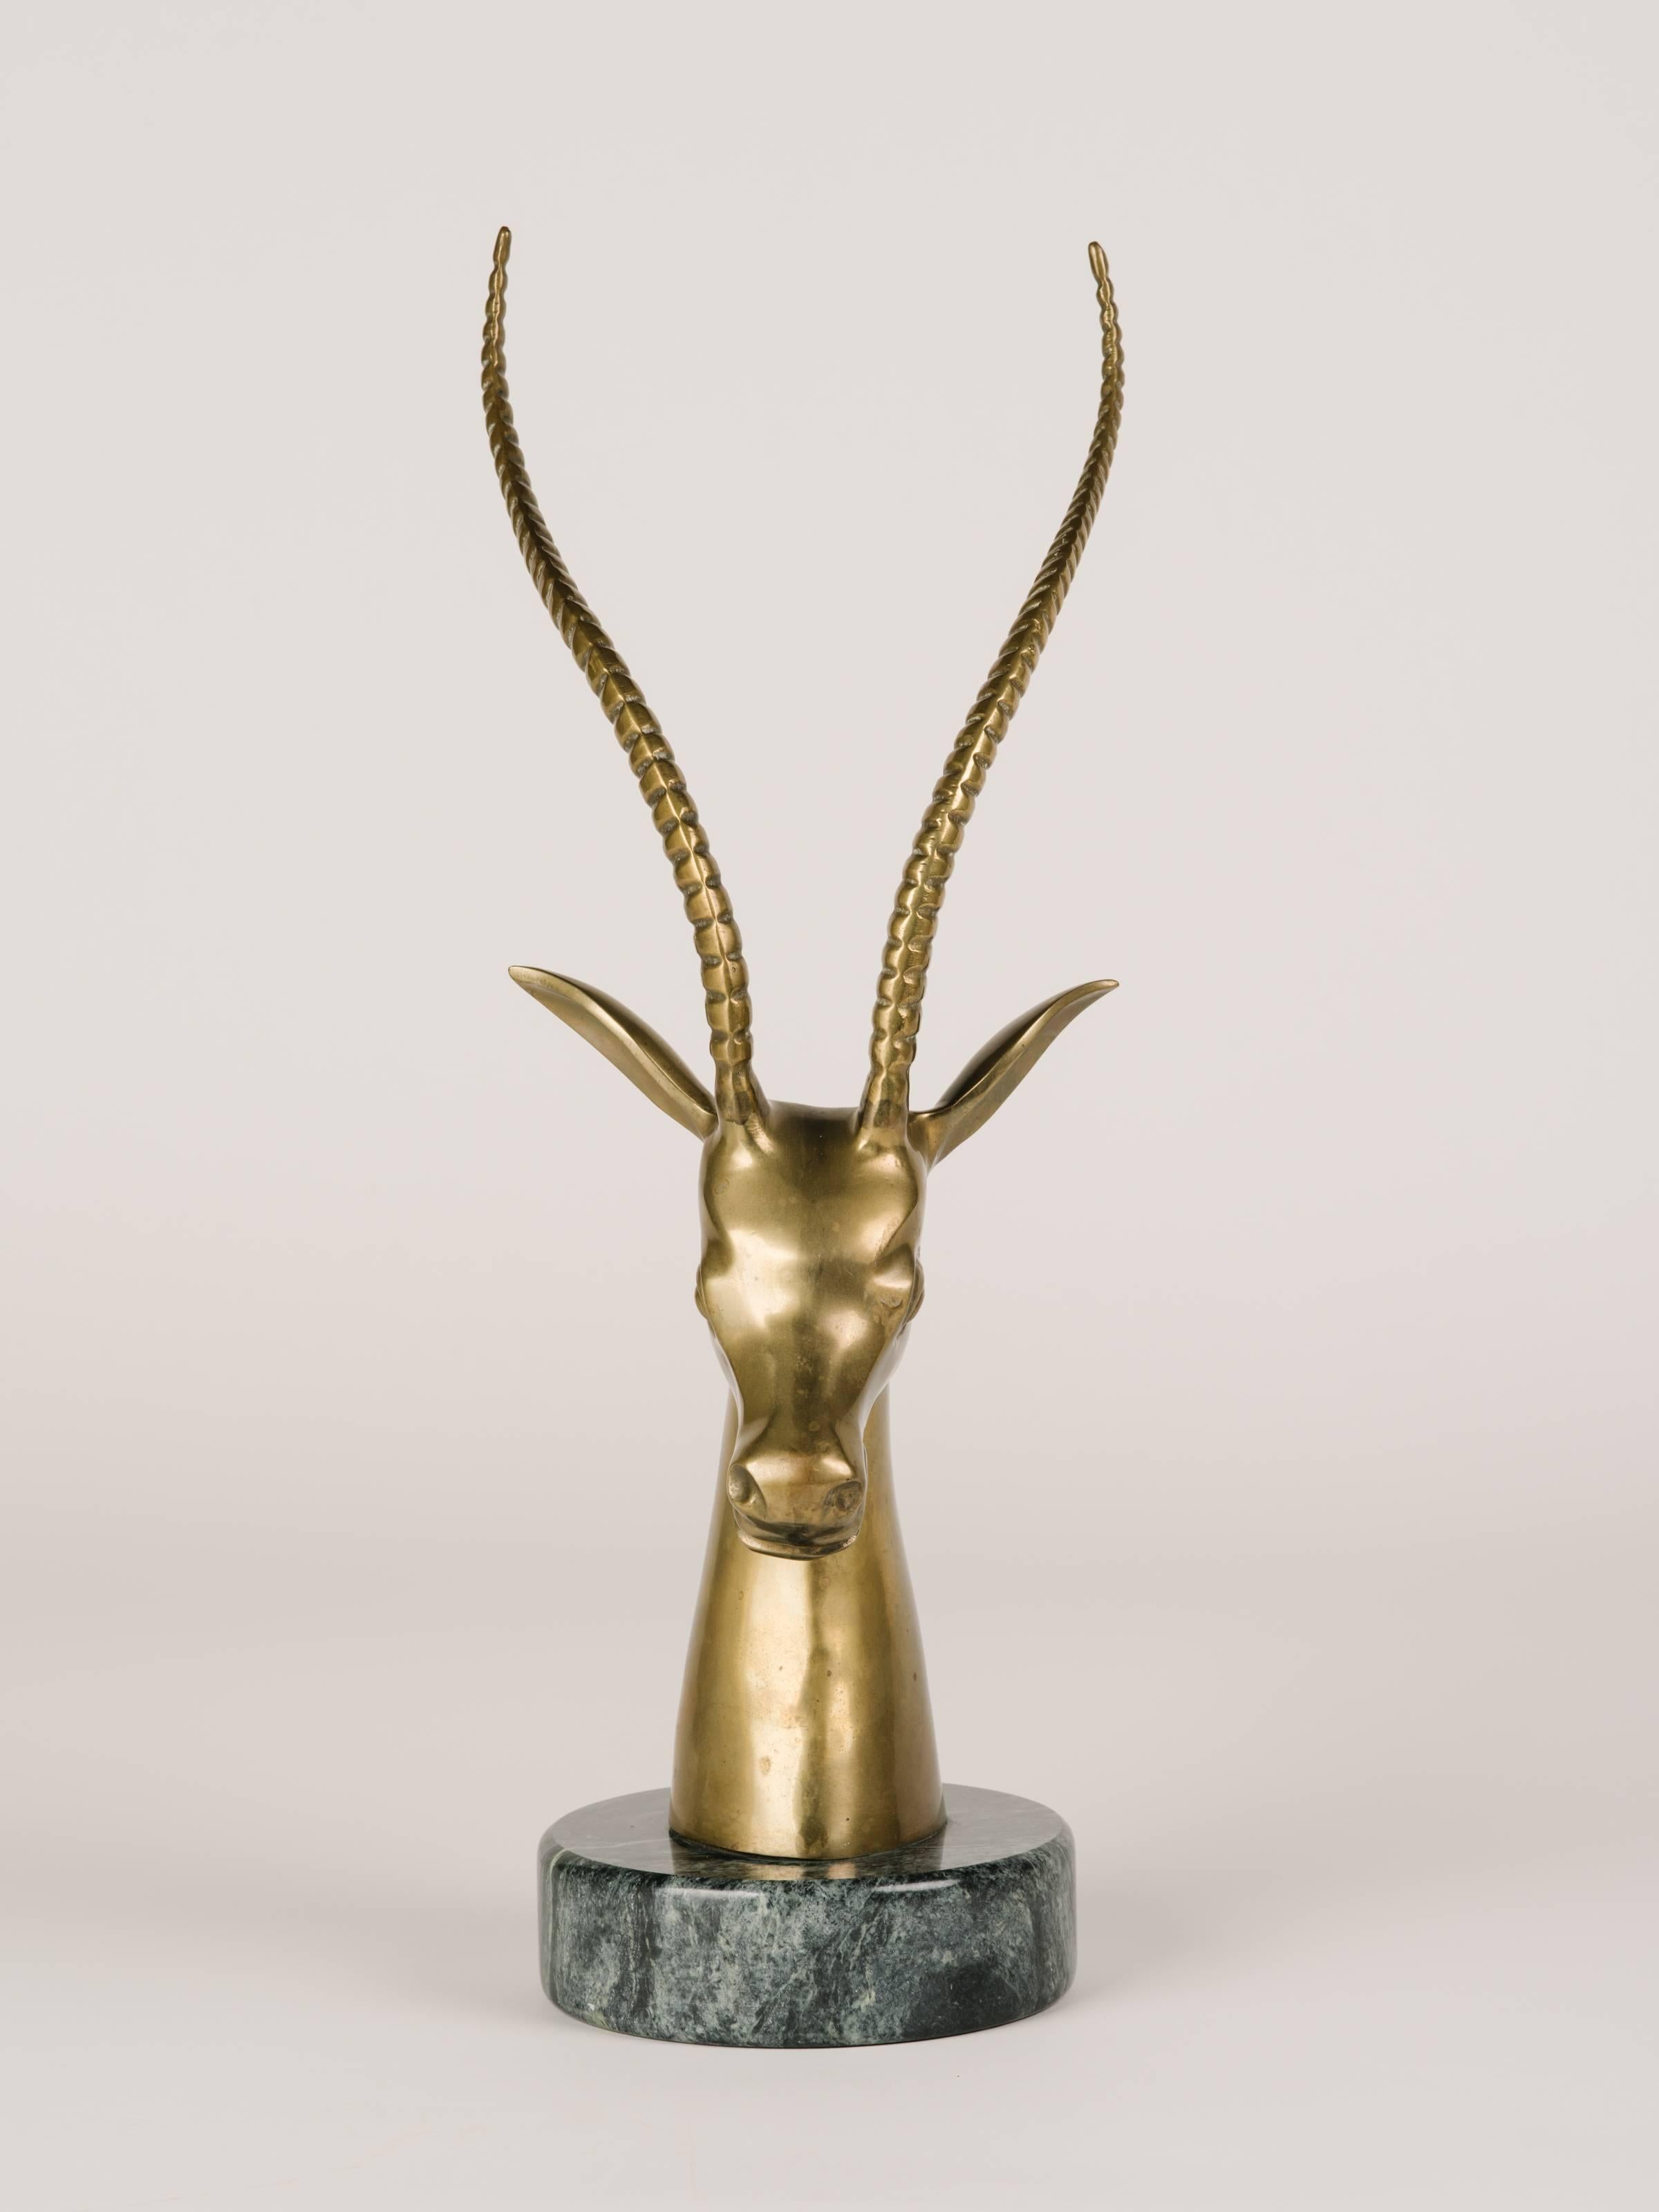 Midcentury hand-forged sculpture of stylized gazelle or ibex. Minor patinated spots on brass adds to its vintage beauty. Features a hand polished exotic marble base in hues of black and grey.